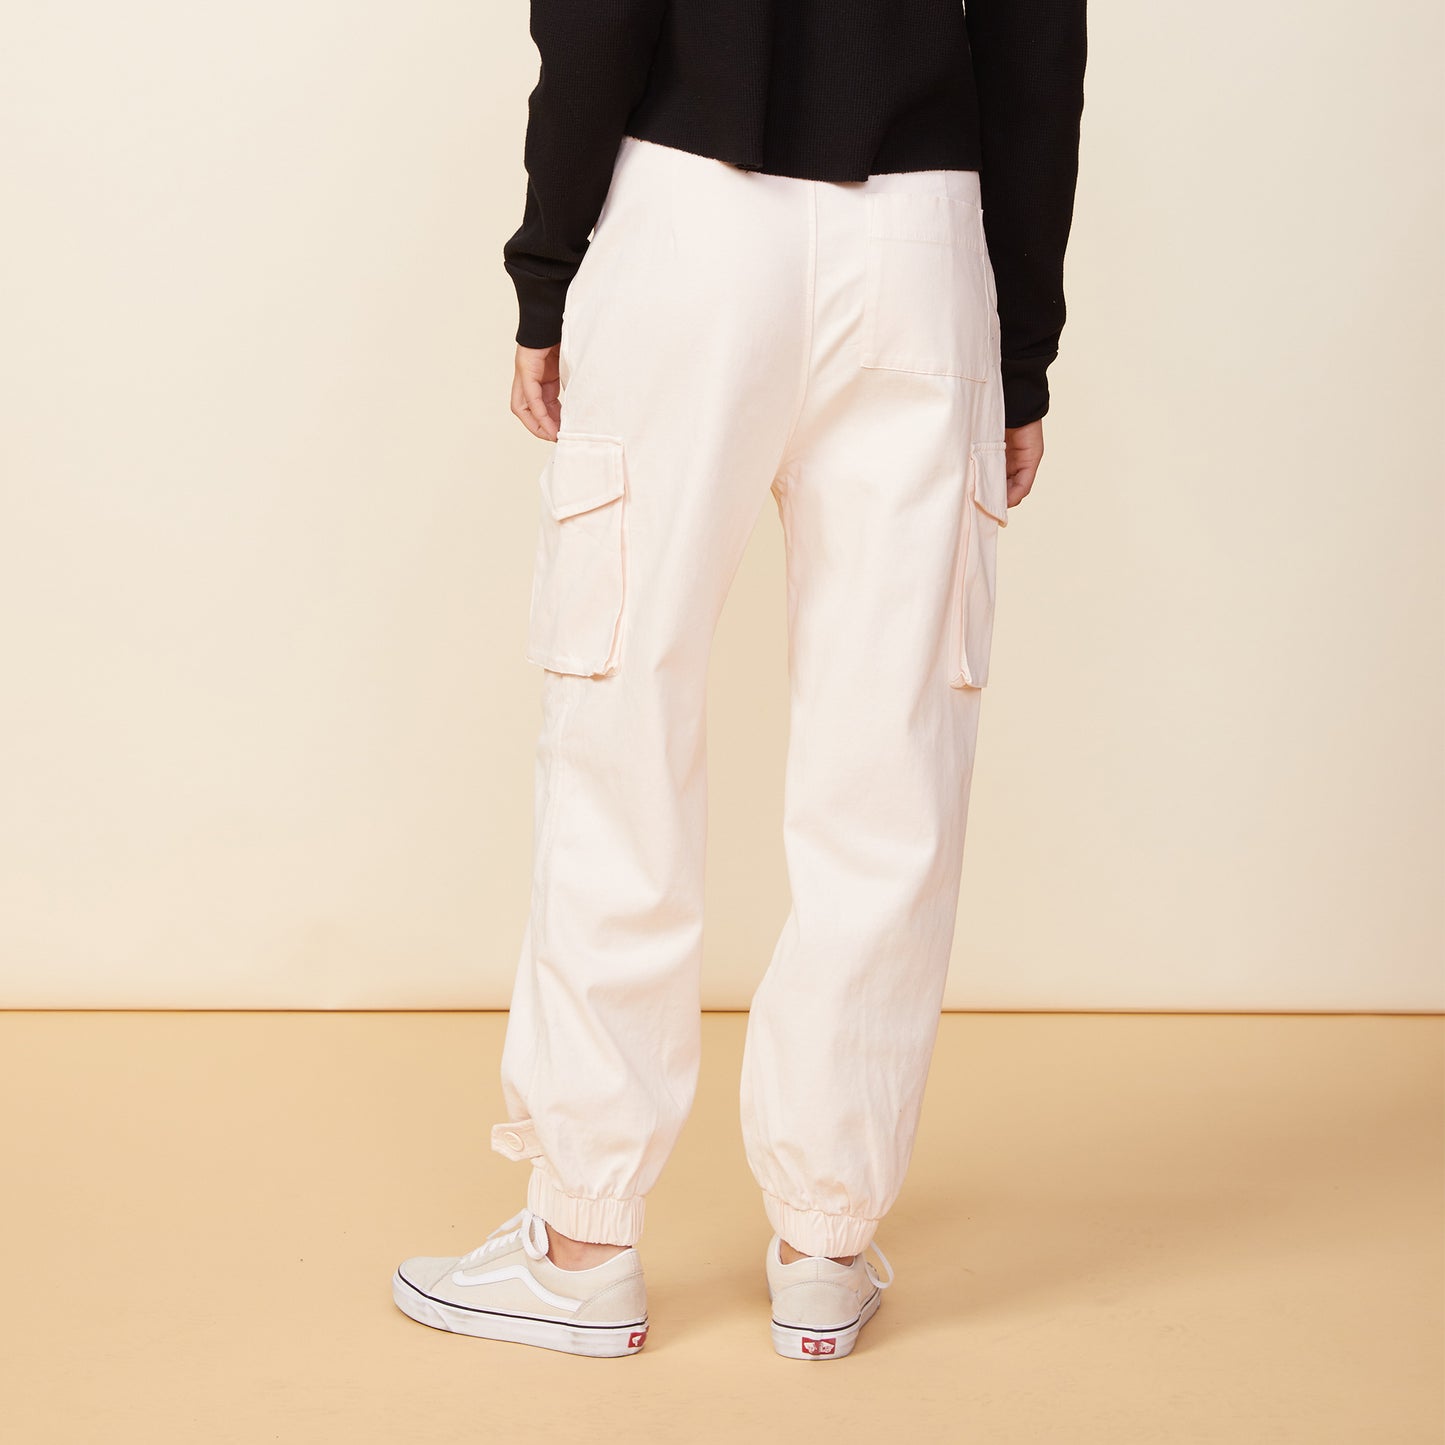 Back view of model wearing the utility pants in off white.